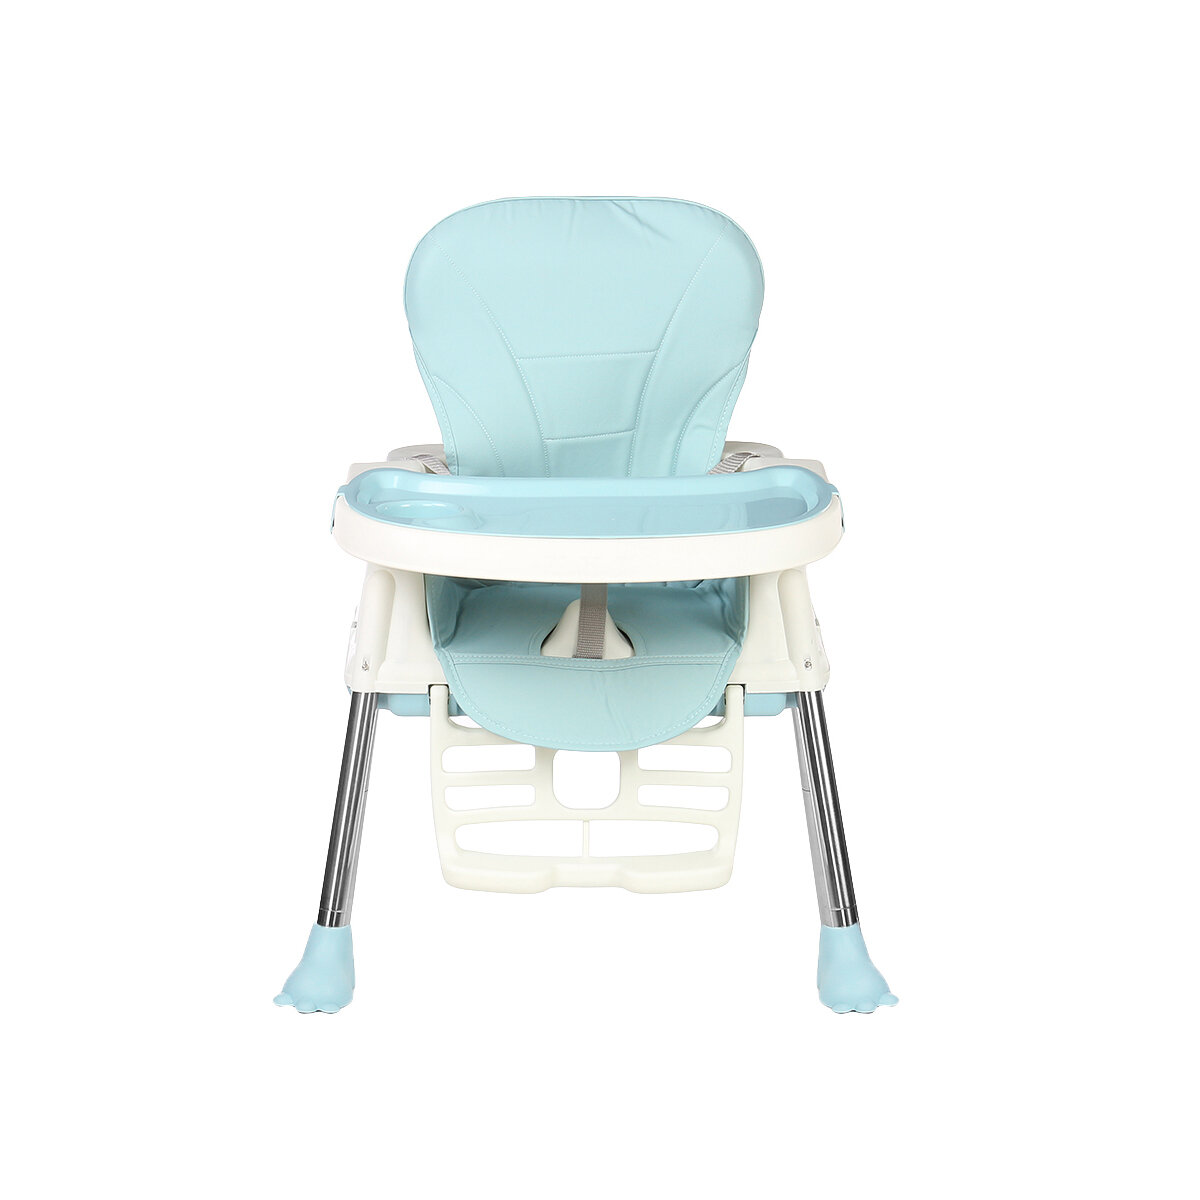 Baby Dining Chair Multifunctional Portable Foldable Safe Children Feeding Chair